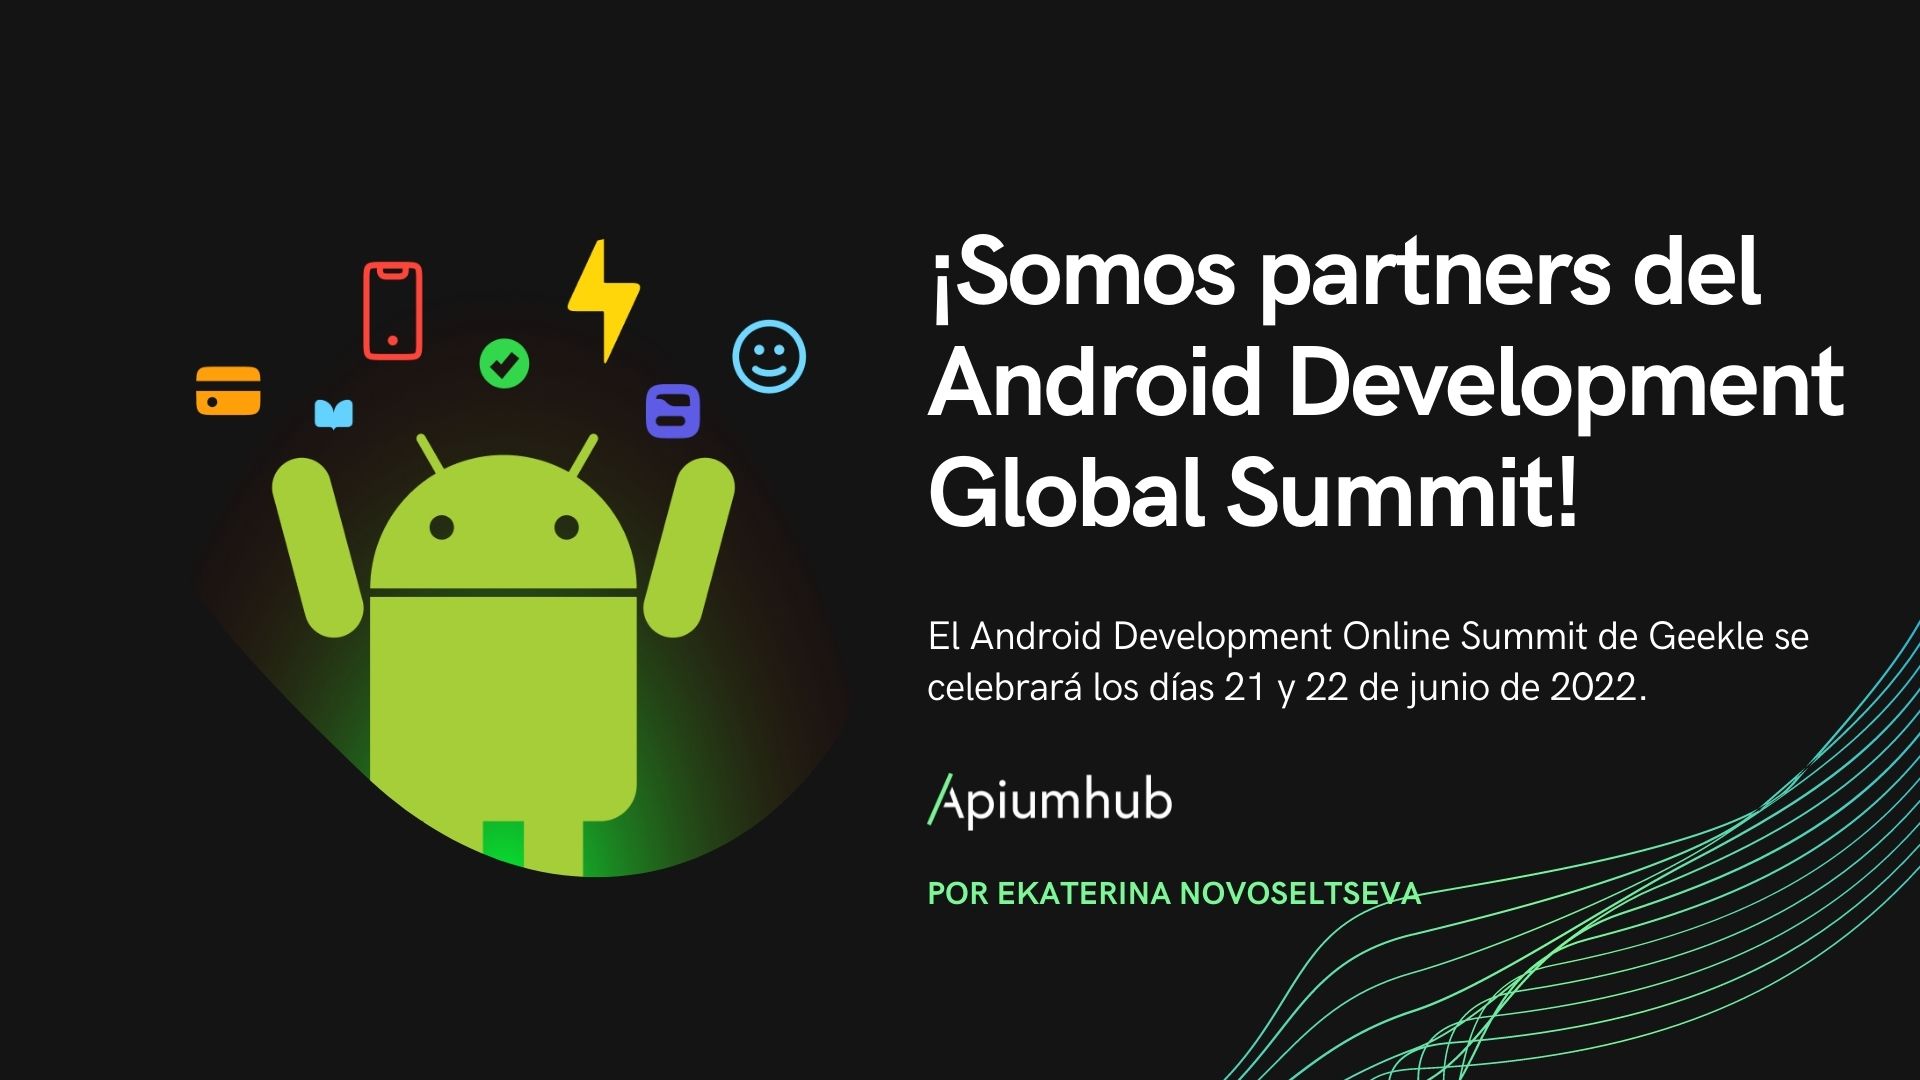 ¡Somos partners del Android Development Global Summit!